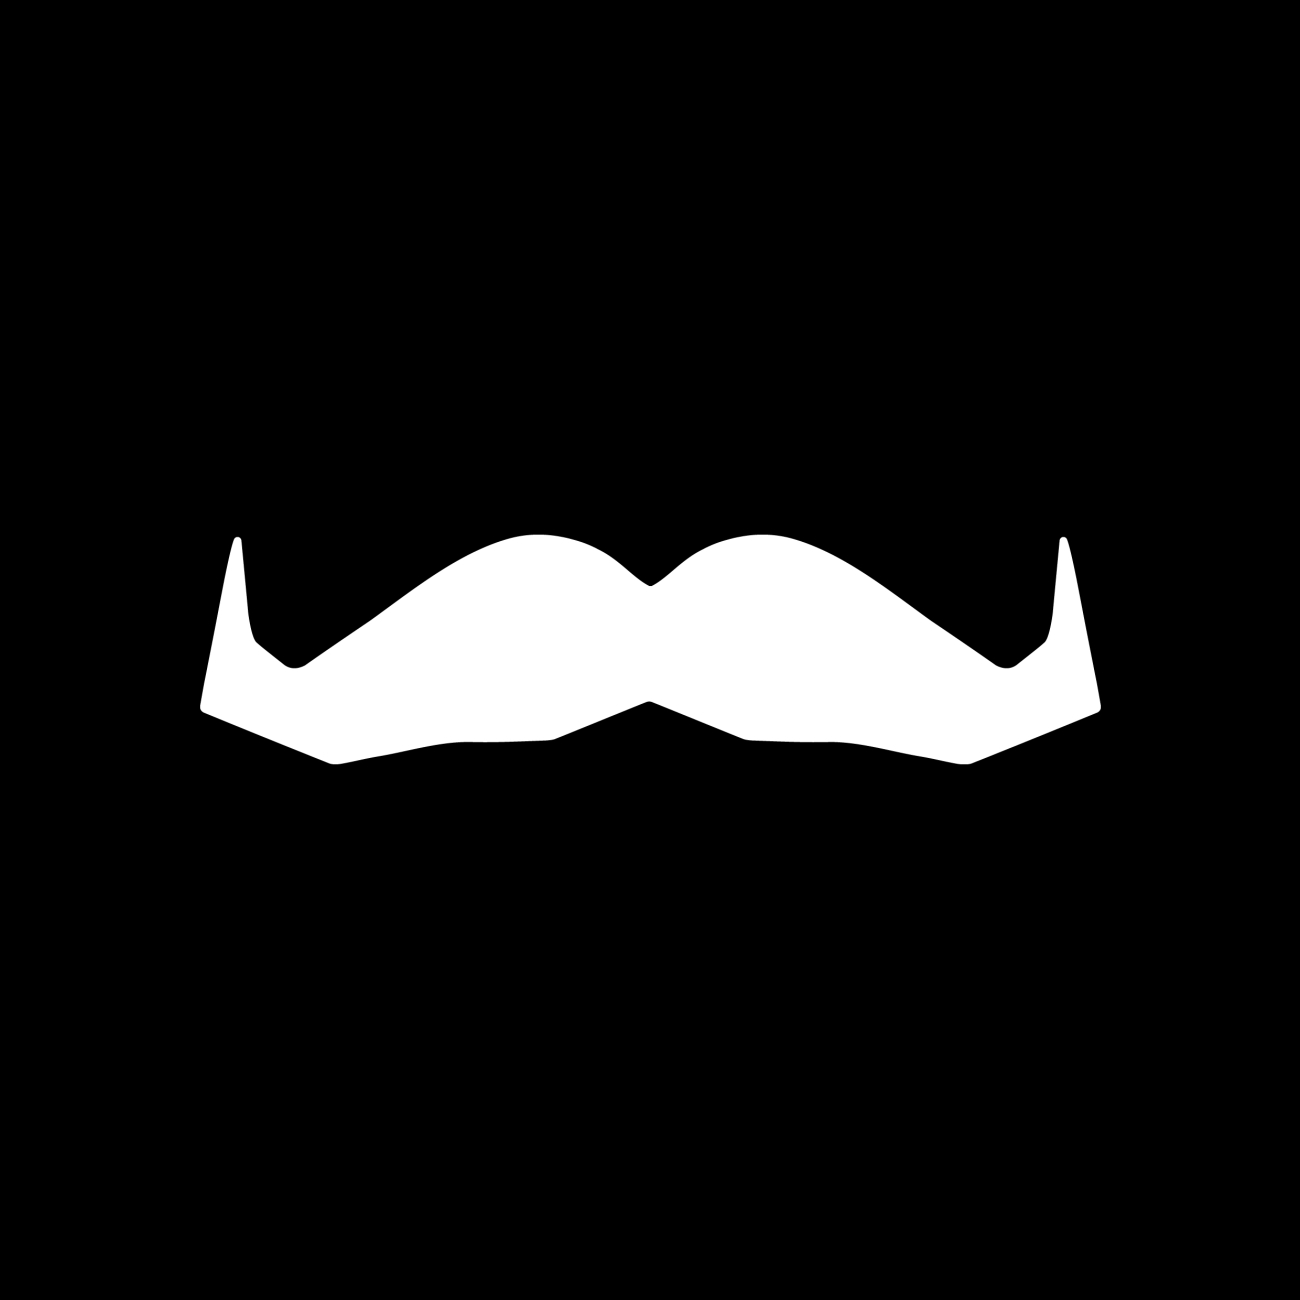 Moustache promoting Movember